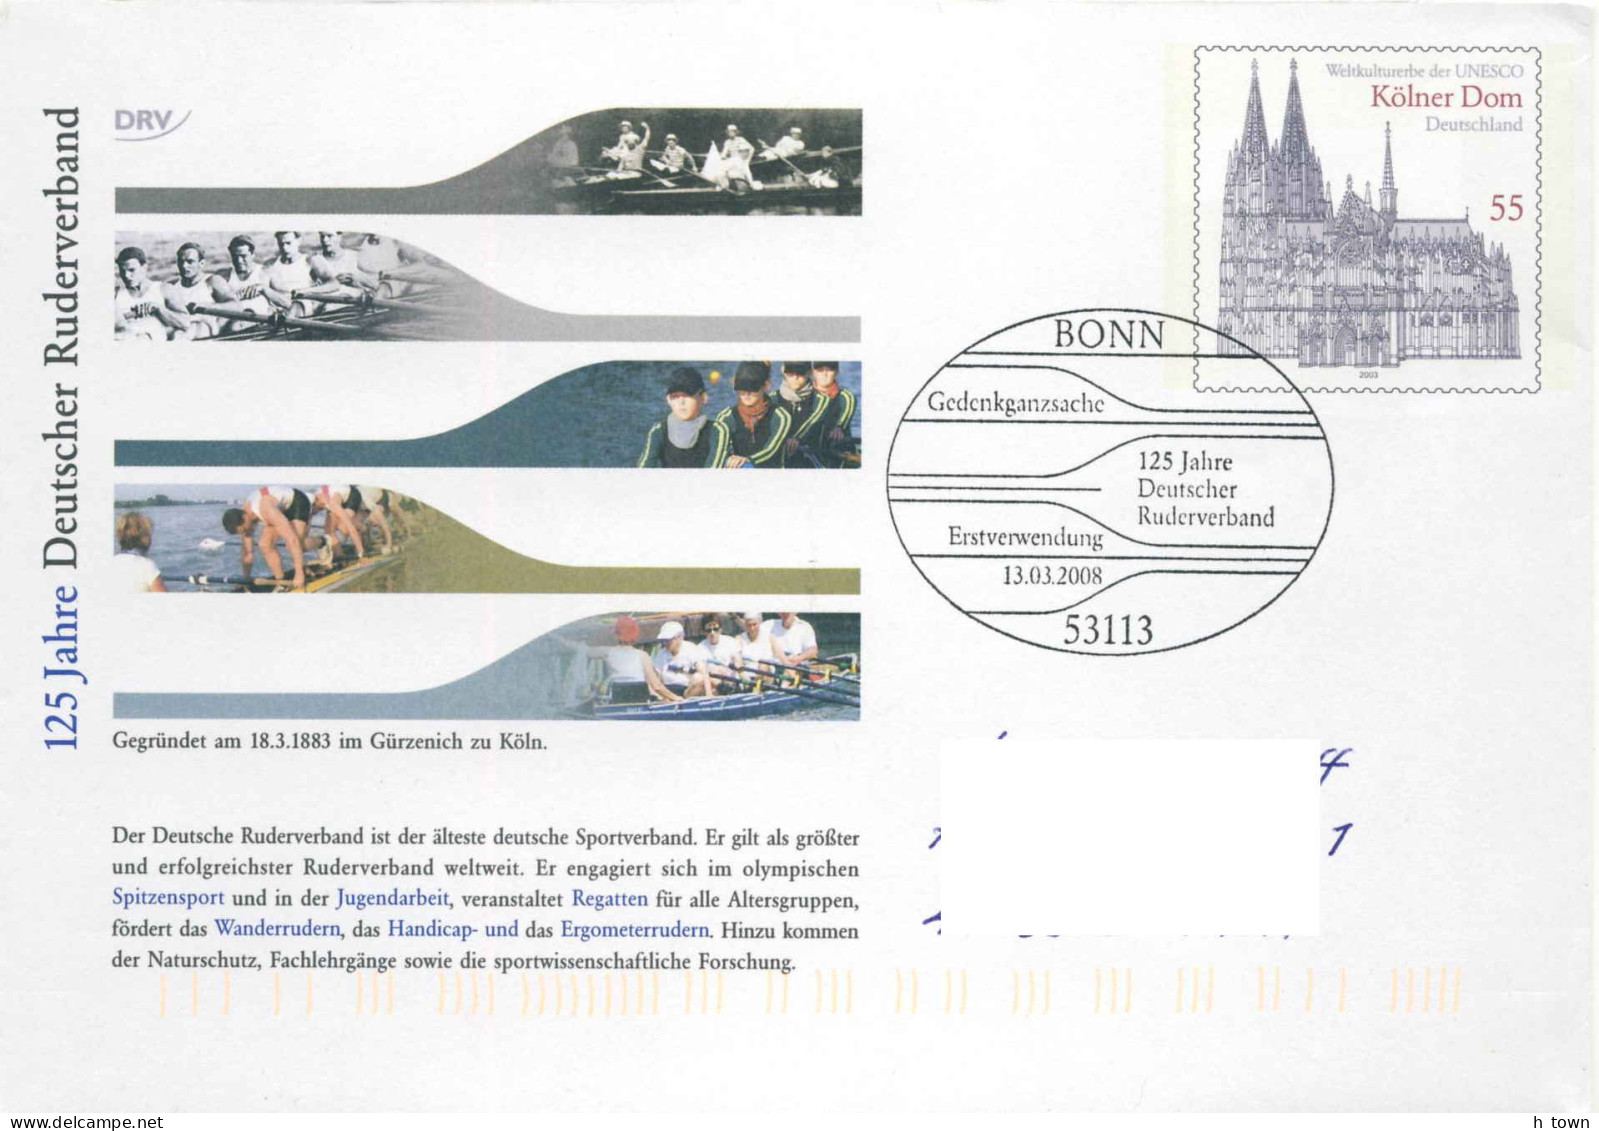 954  Fédération Allemande D'aviron: PAP D'Allemagne 2008 - Rowing Anniversary: Stationery Cover From Germany - FDC - Rudersport